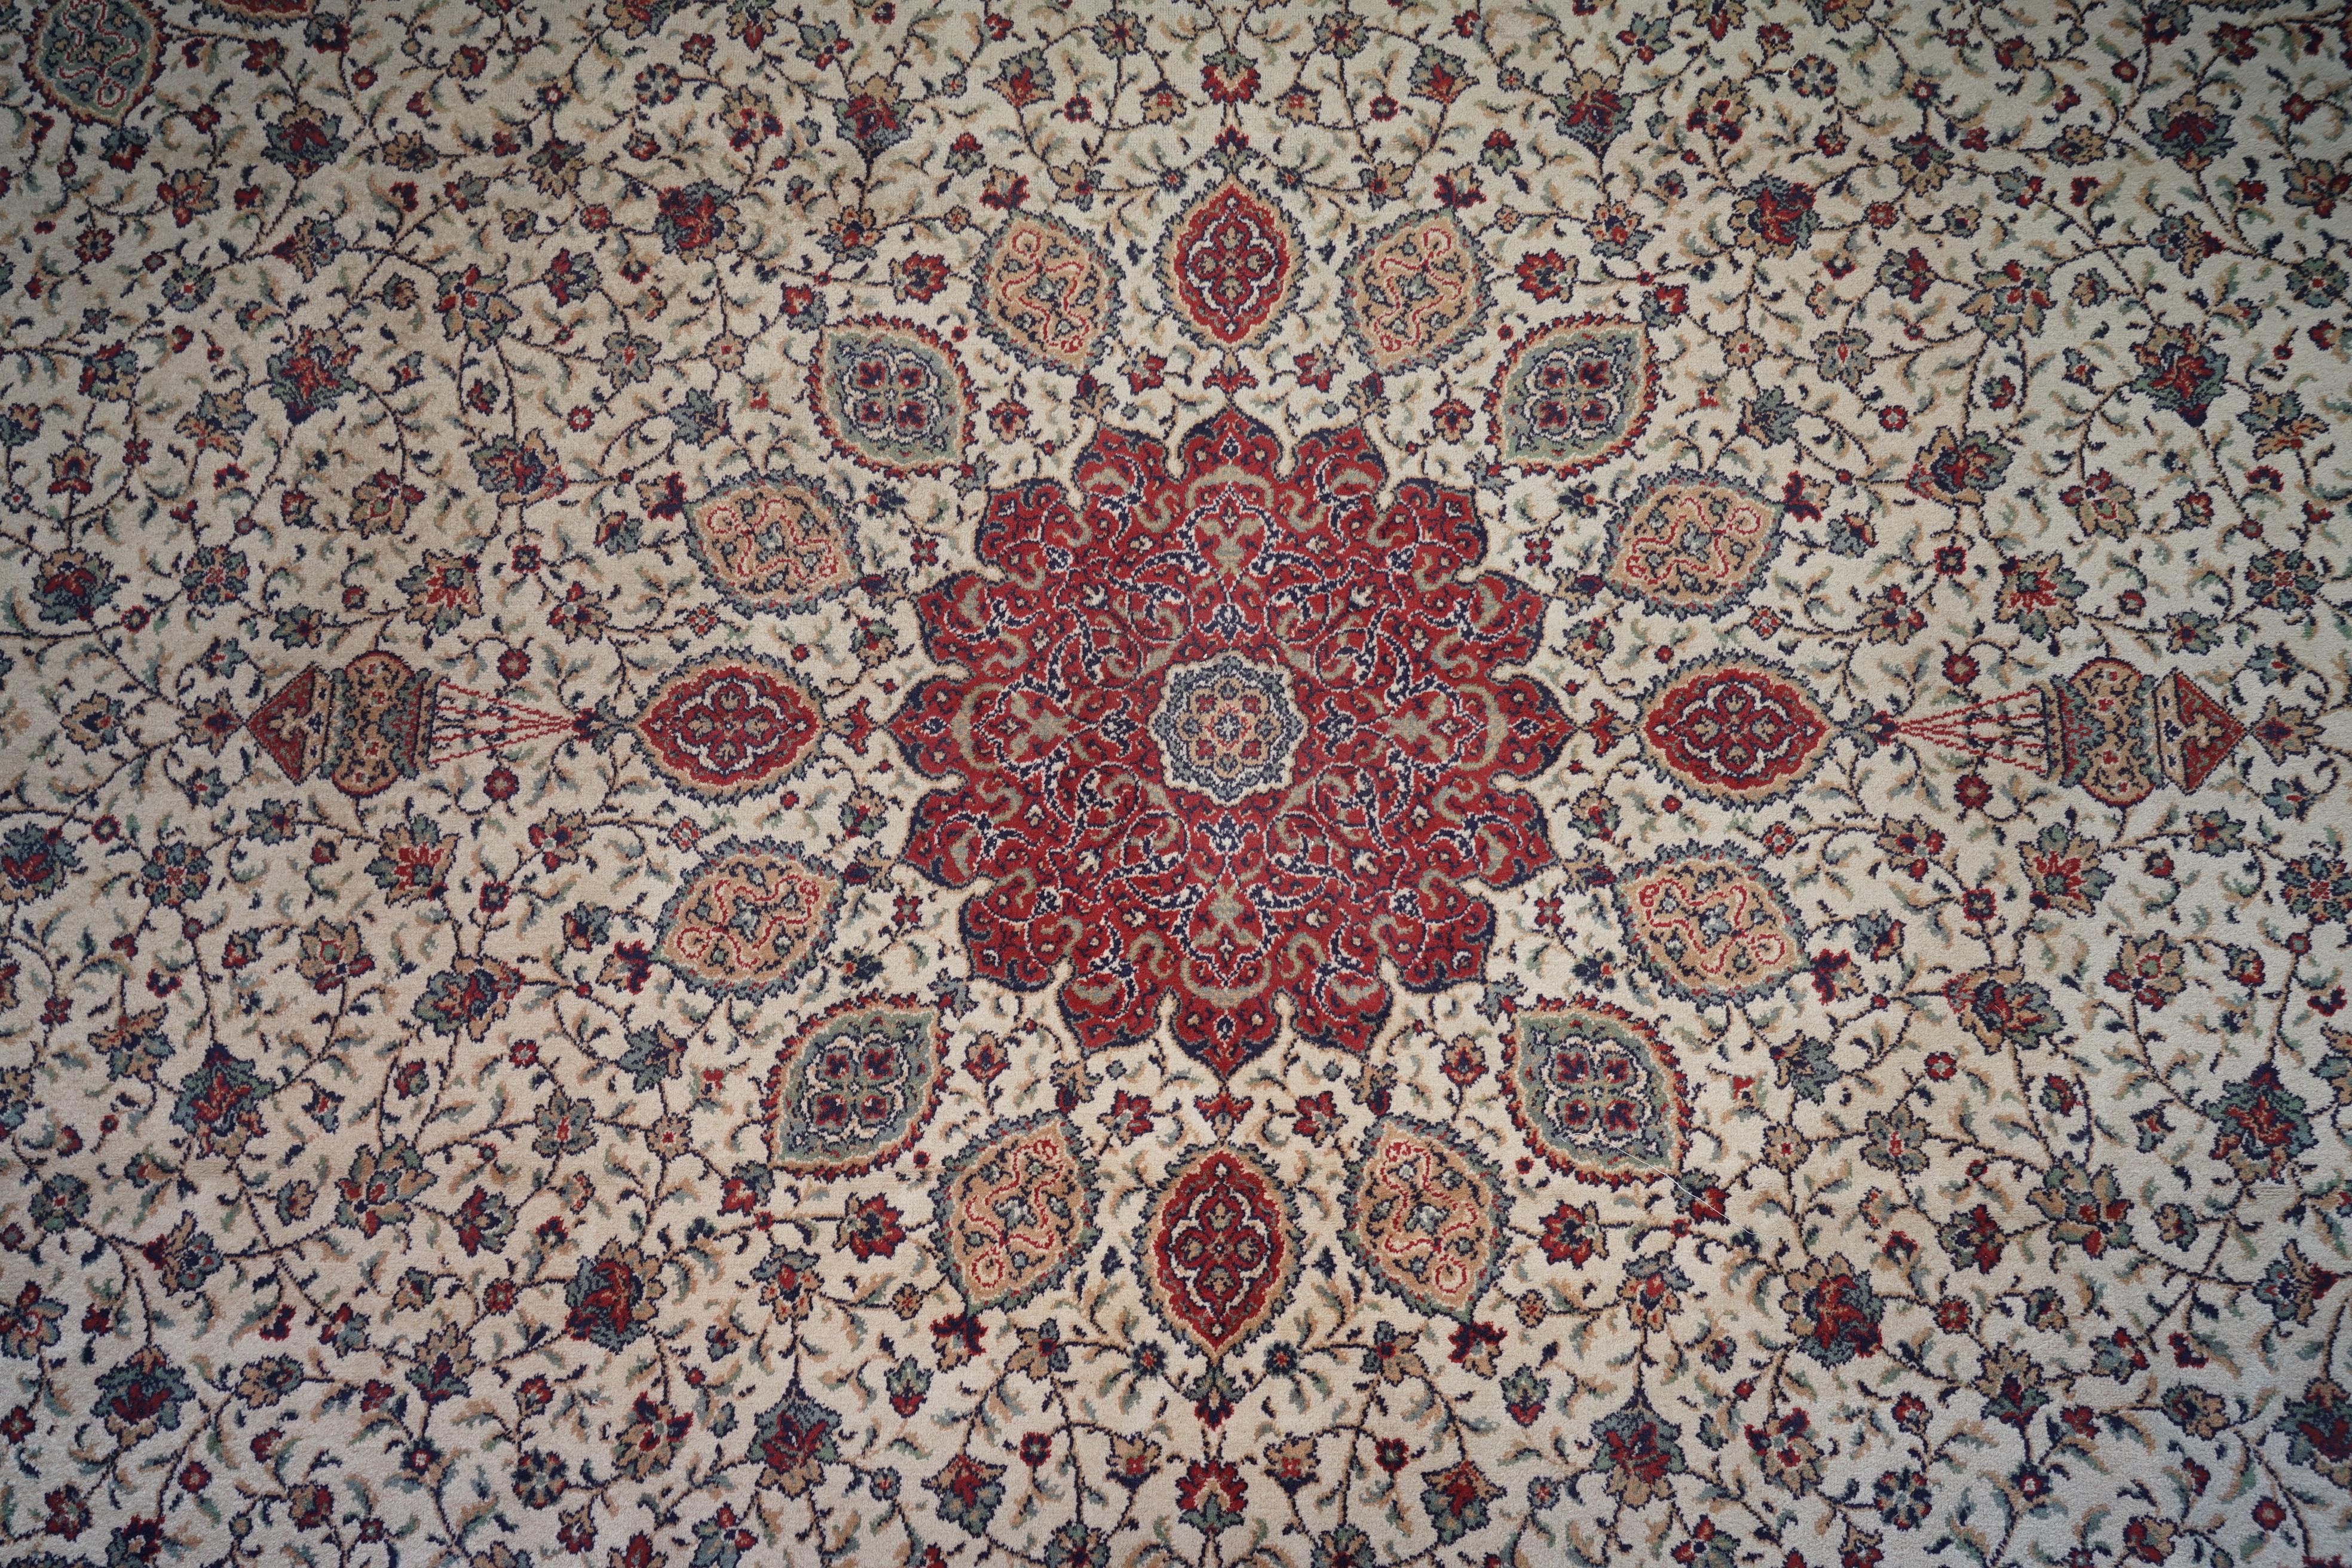 Hand-Crafted Huge French Antique Red Extra Large Rug Carpet Must See Pictures For Sale